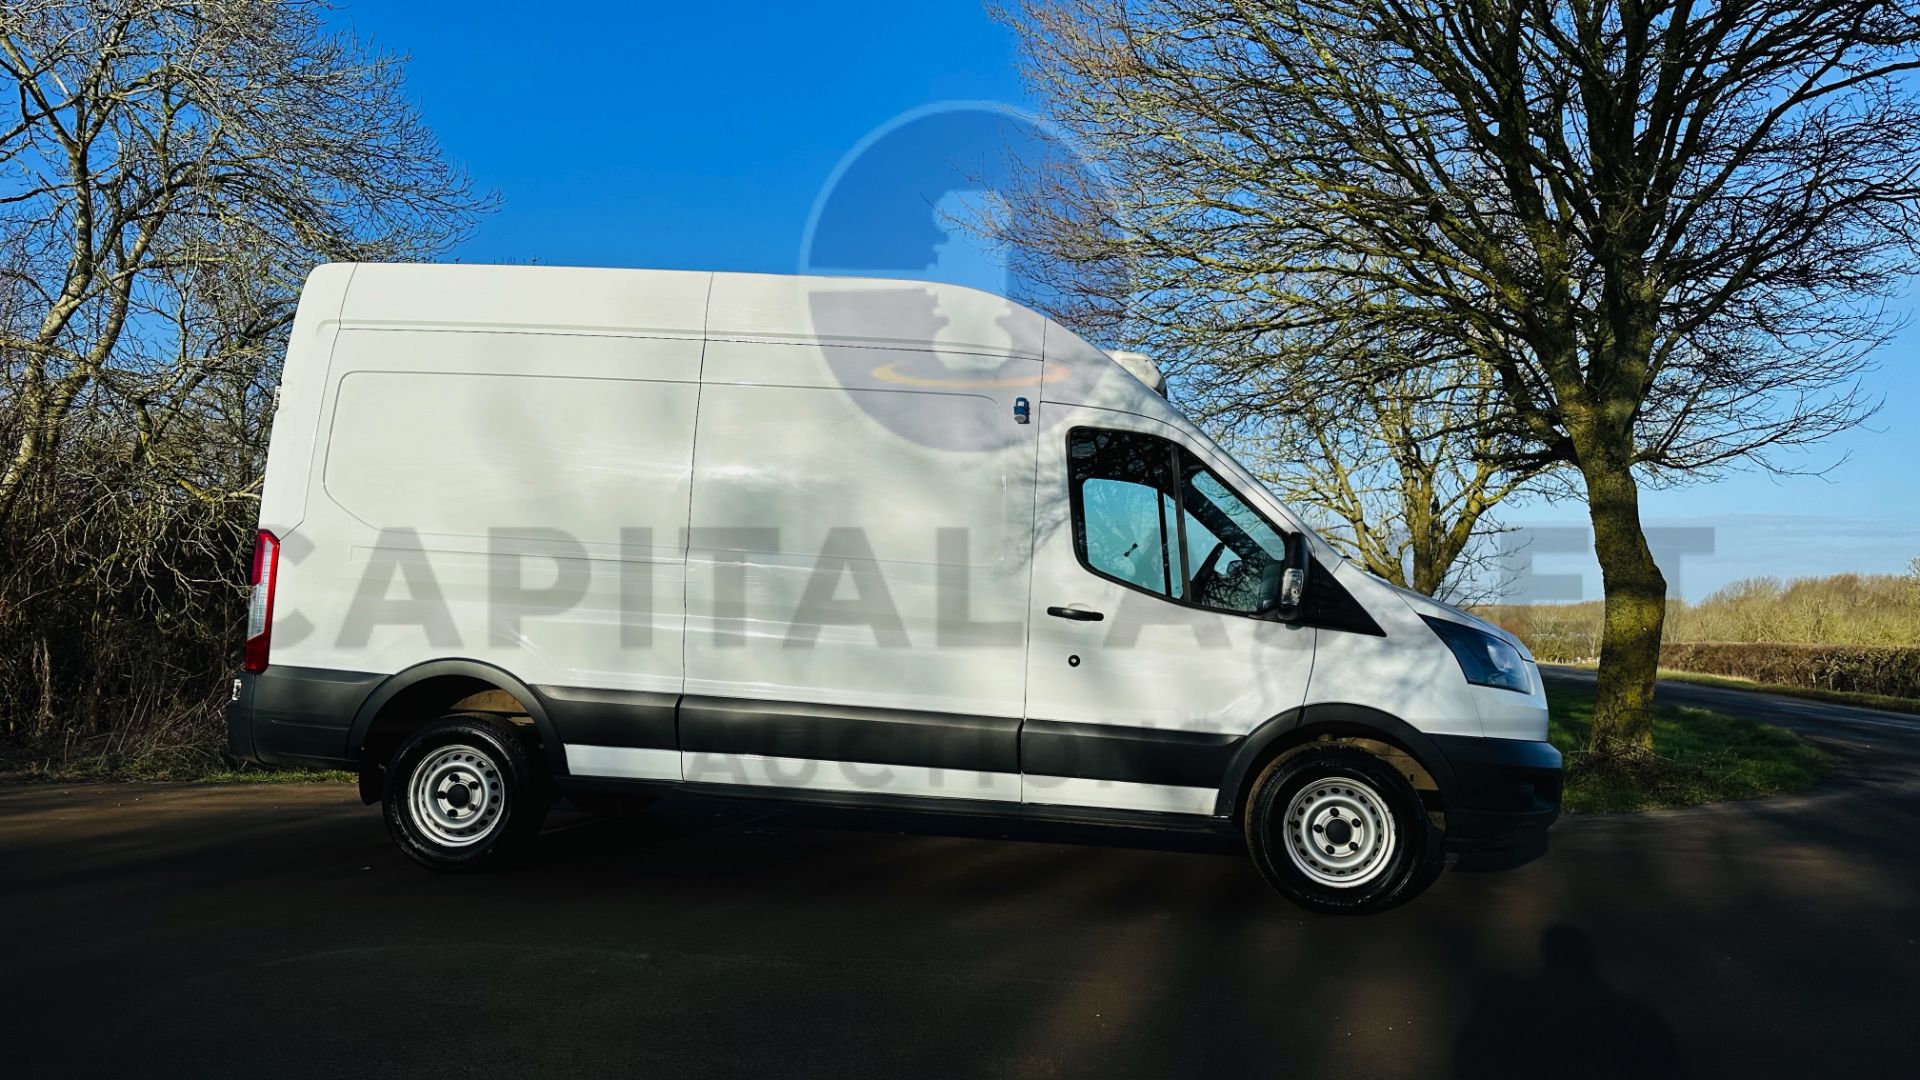 (On Sale) FORD TRANSIT 130 T350 *LWB -REFRIGERATED VAN* (2019 - EURO 6) 2.0 TDCI 'ECOBLUE' - 6 SPEED - Image 14 of 43